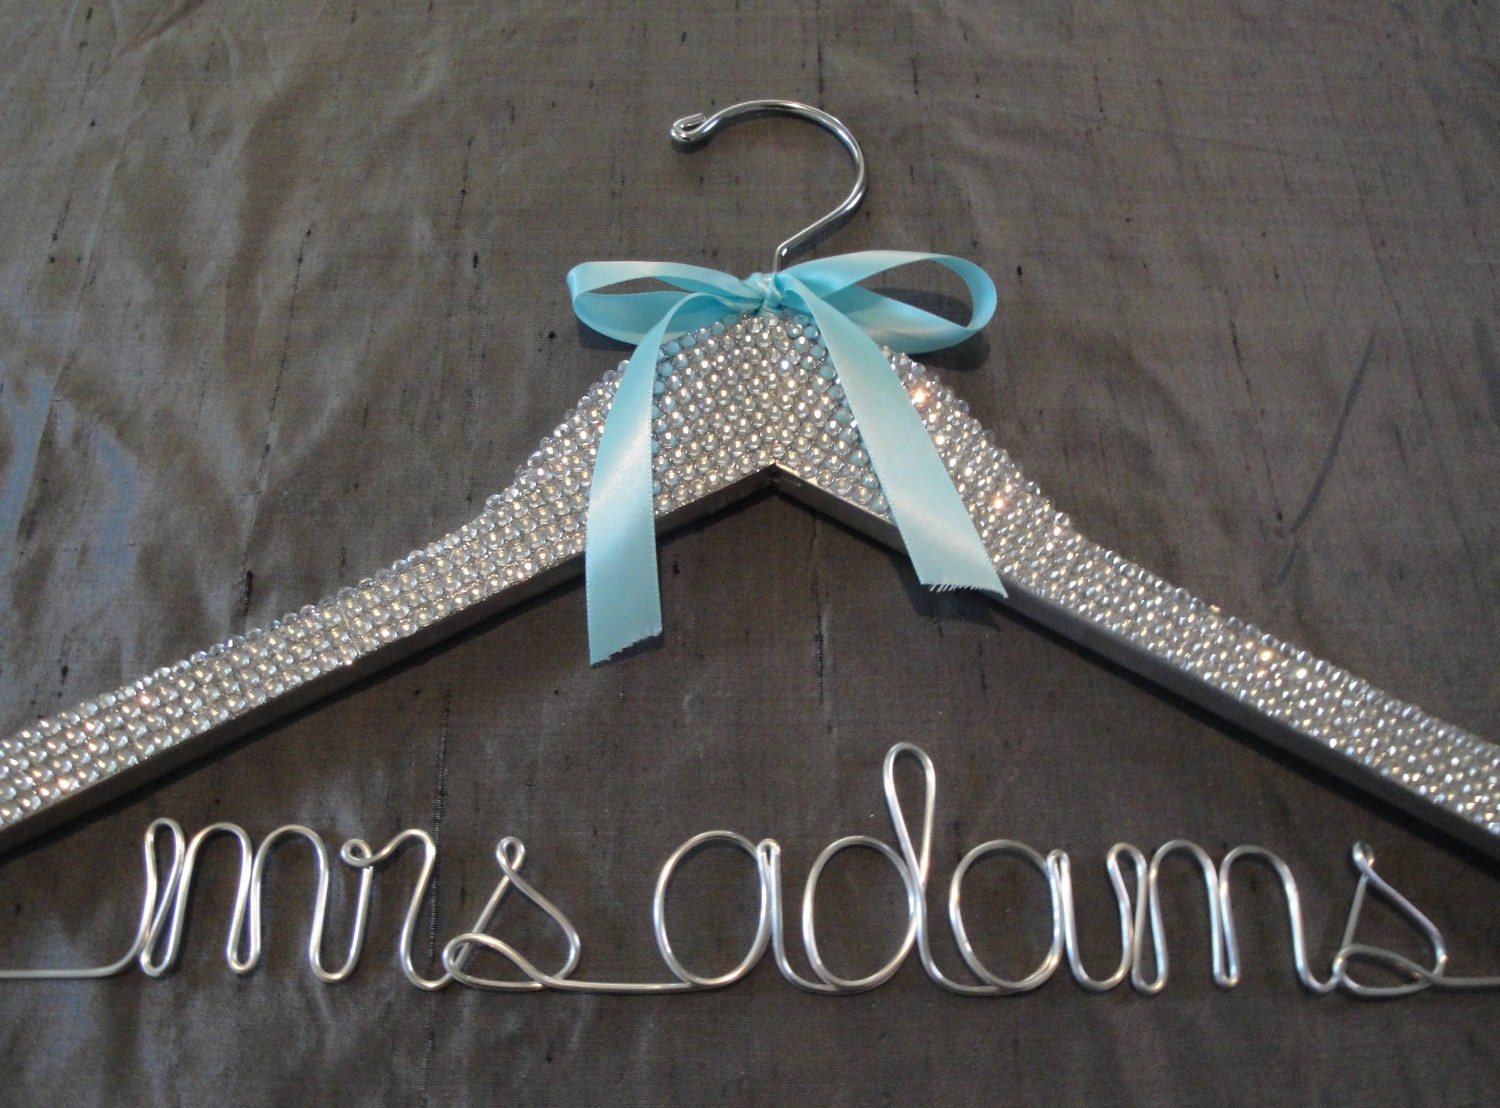 Girl's Best Friend -the ULTIMATE Personalized Bridal Hanger - SILVER wire